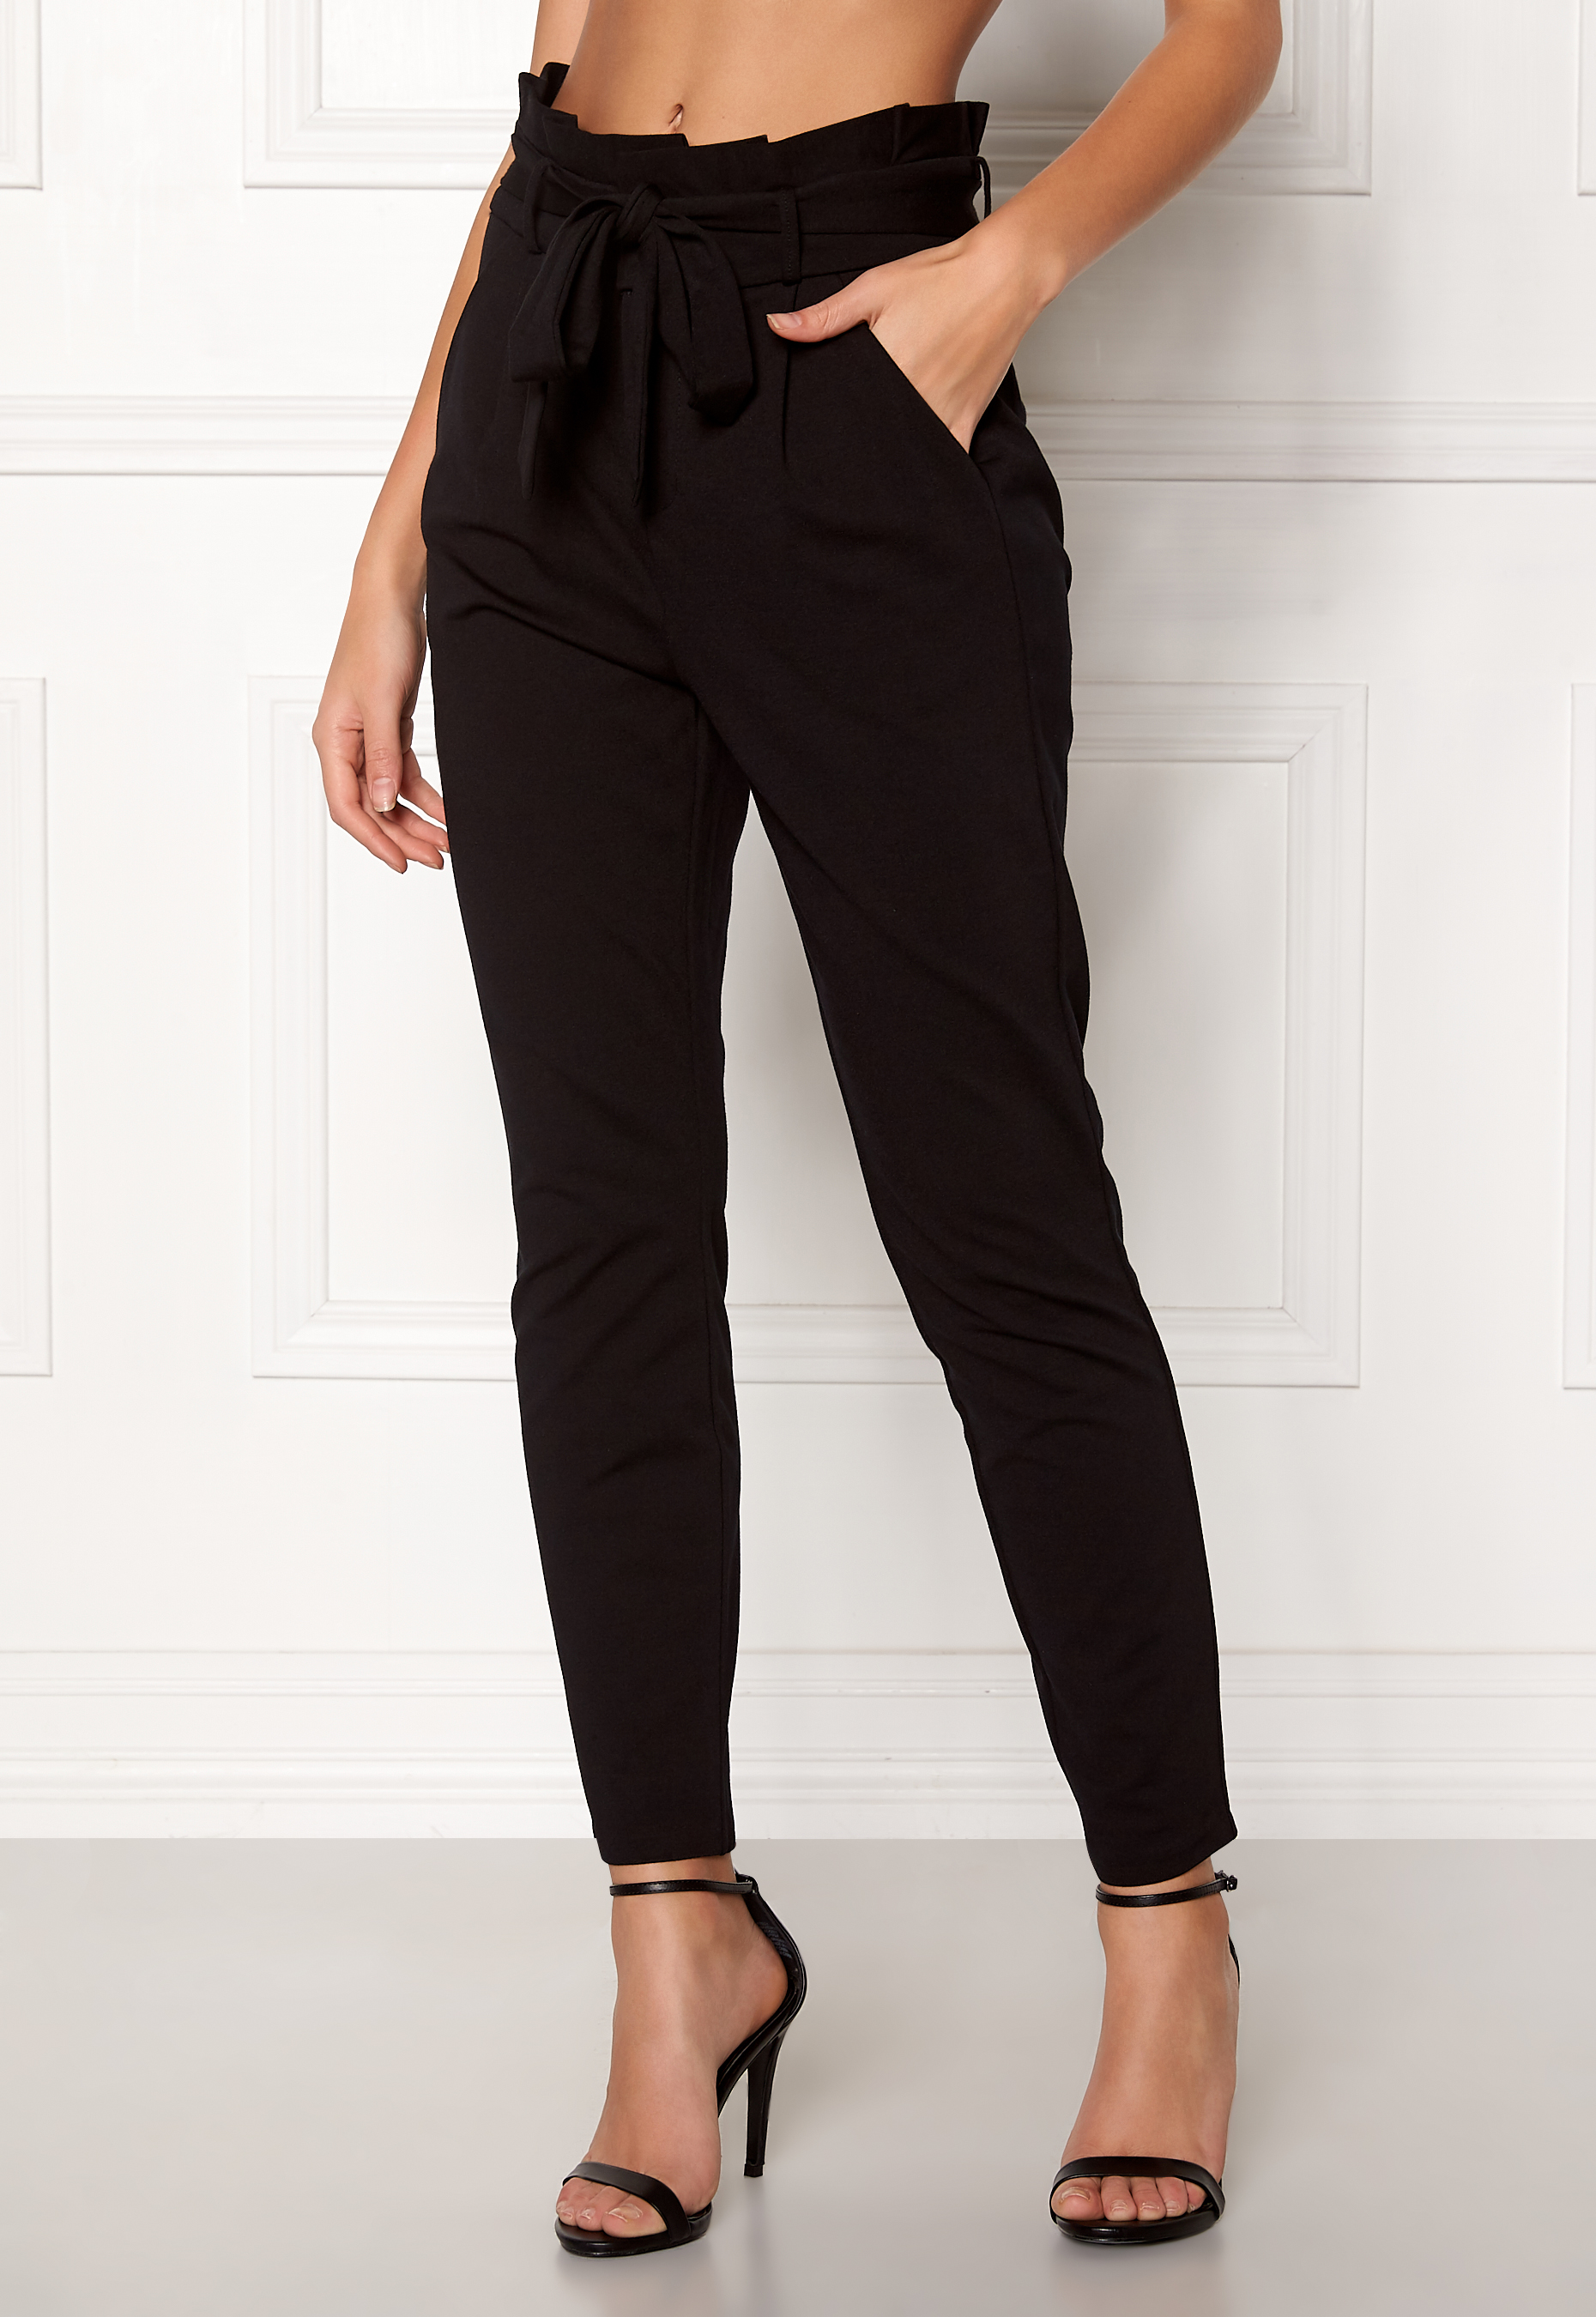 Vero Moda Pants Hot Sale, UP TO 60% OFF | www.realliganaval.com